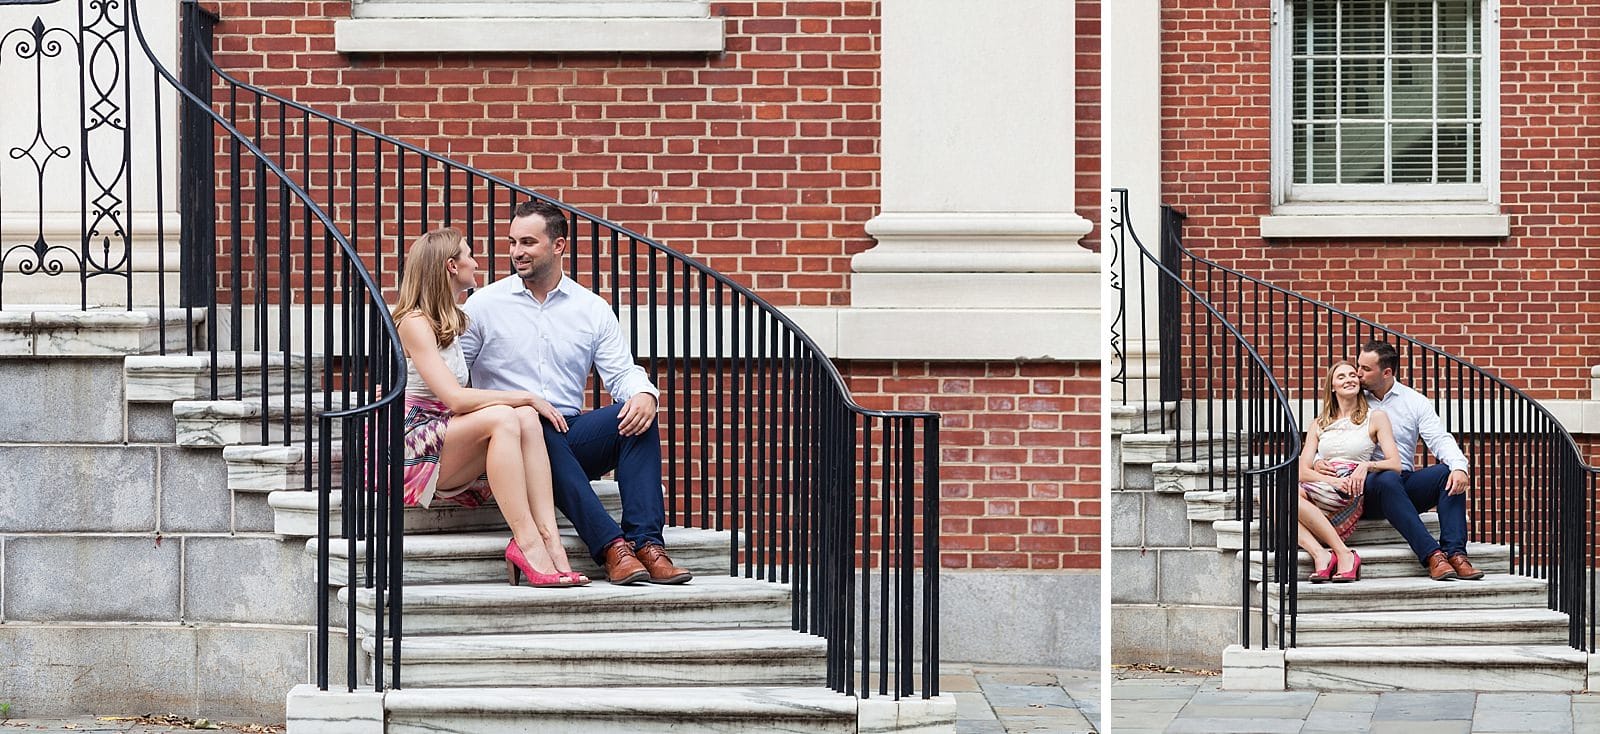 Old City Philadelphia Engagement session, couple sitting on staircase, couple kissing on the cheek